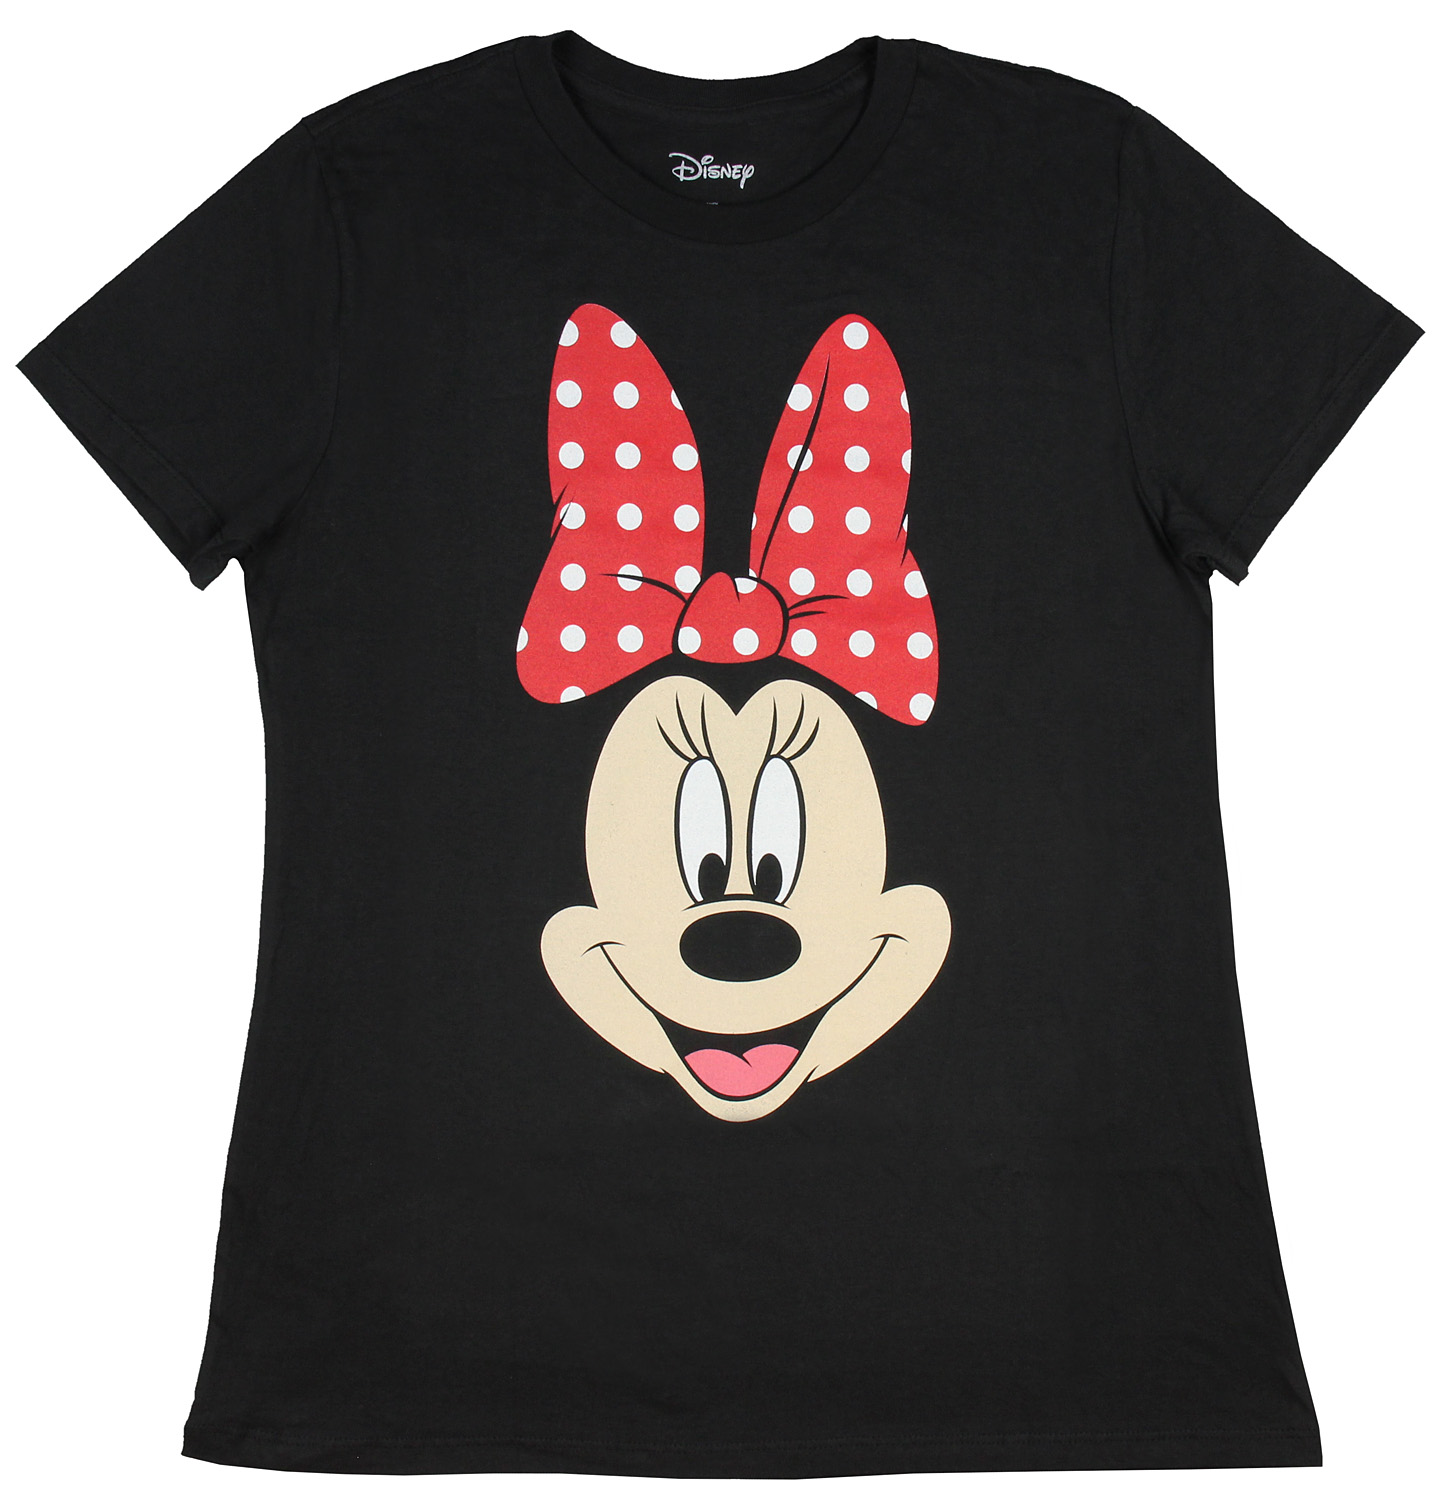 Disney Minnie Mouse Shirt Juniors' I Am Minnie Big Face Officially Licensed Graphic T-Shirt